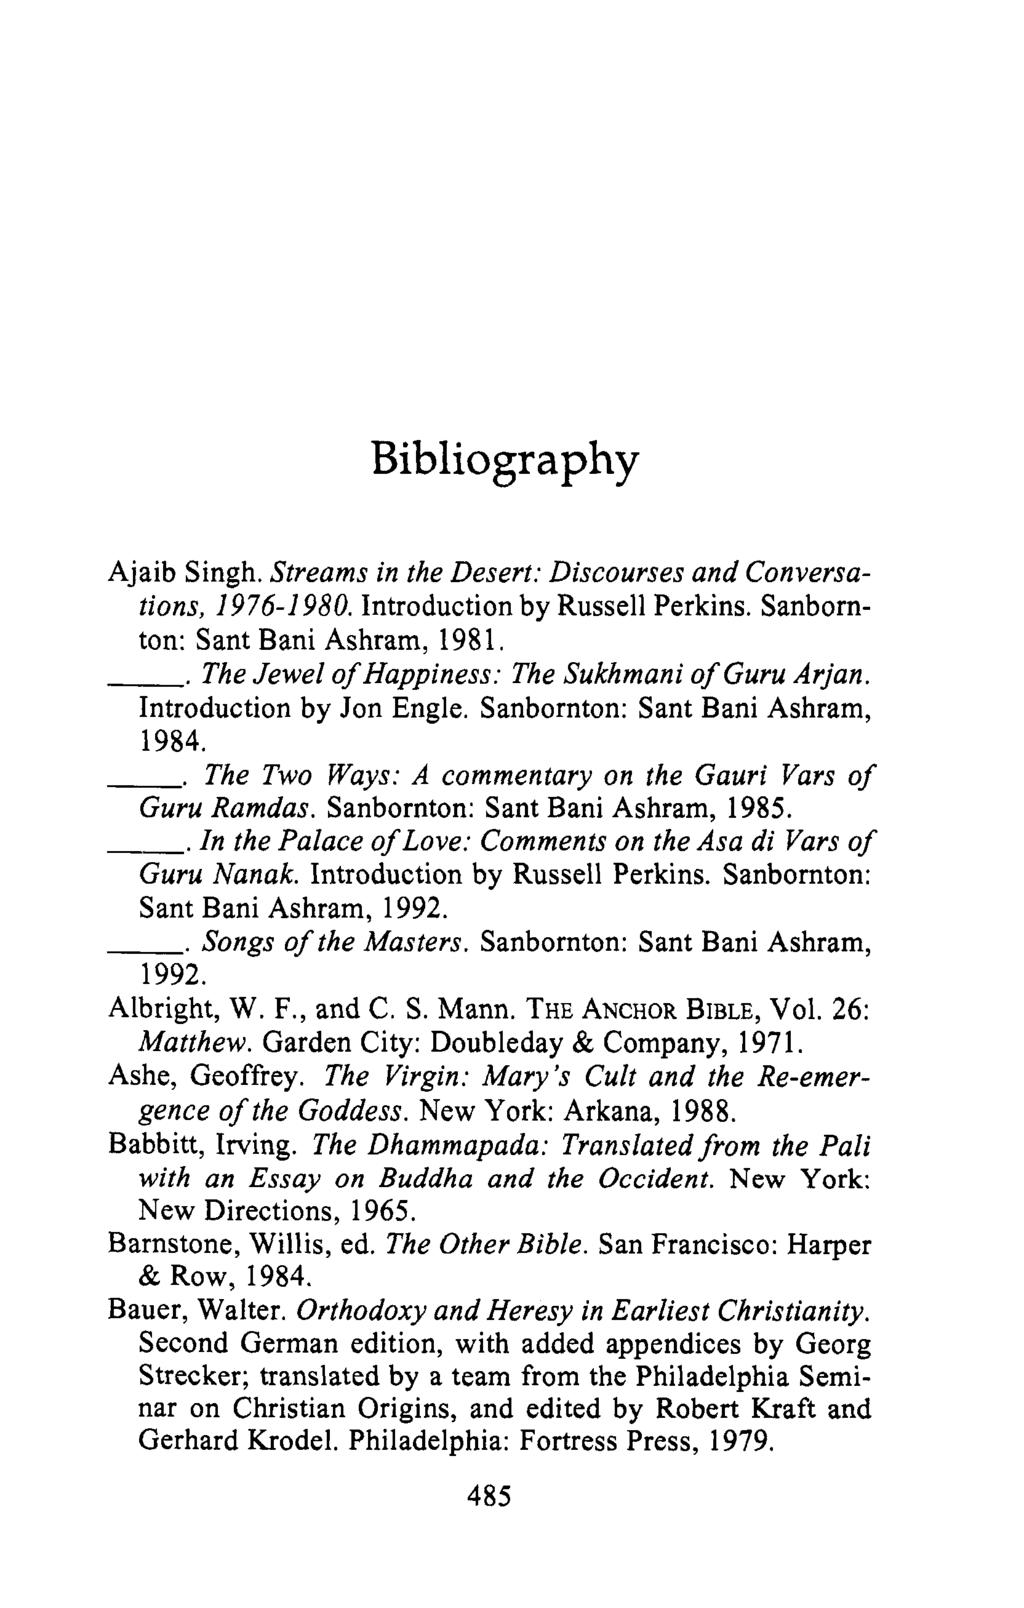 Bibliography Ajaib Singh. Streams in the Desert: Discourses and Conversations, 1976-1 980. Introduction by Russell Perkins. Sanbornton: Sant Bani Ashram, 1981.